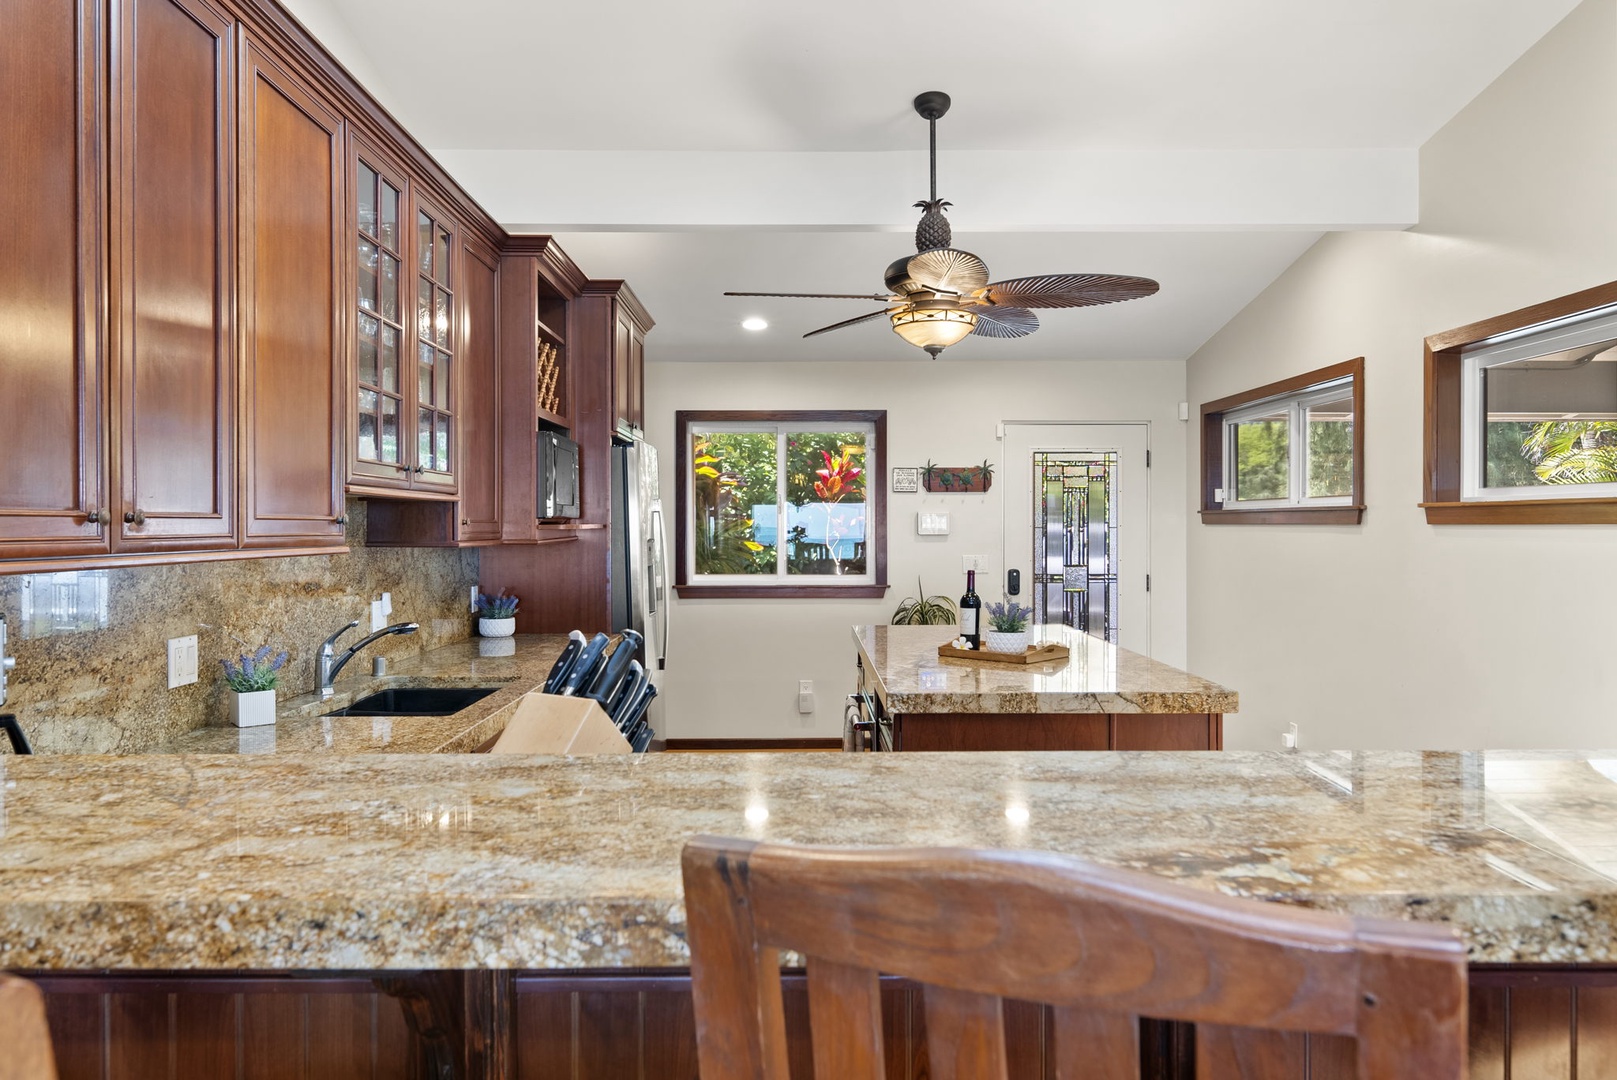 Waialua Vacation Rentals, Hale Oka Nunu - The kitchen has everything you need to prepare meals and has breakfast bar seating